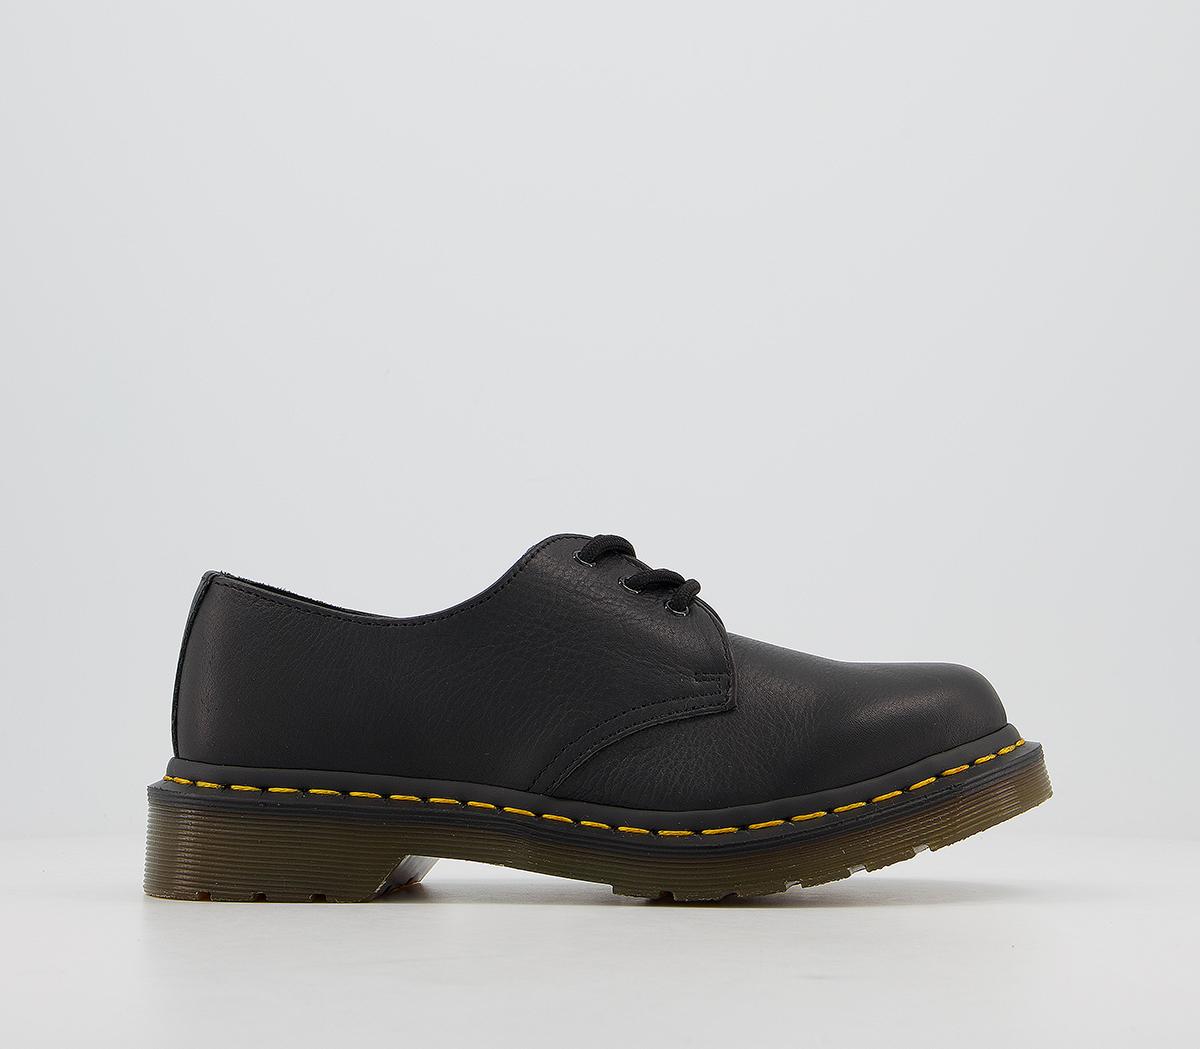 Dr. Martens 3 Eyelet Lace Up Shoes Black Virginia - Flat Shoes for Women